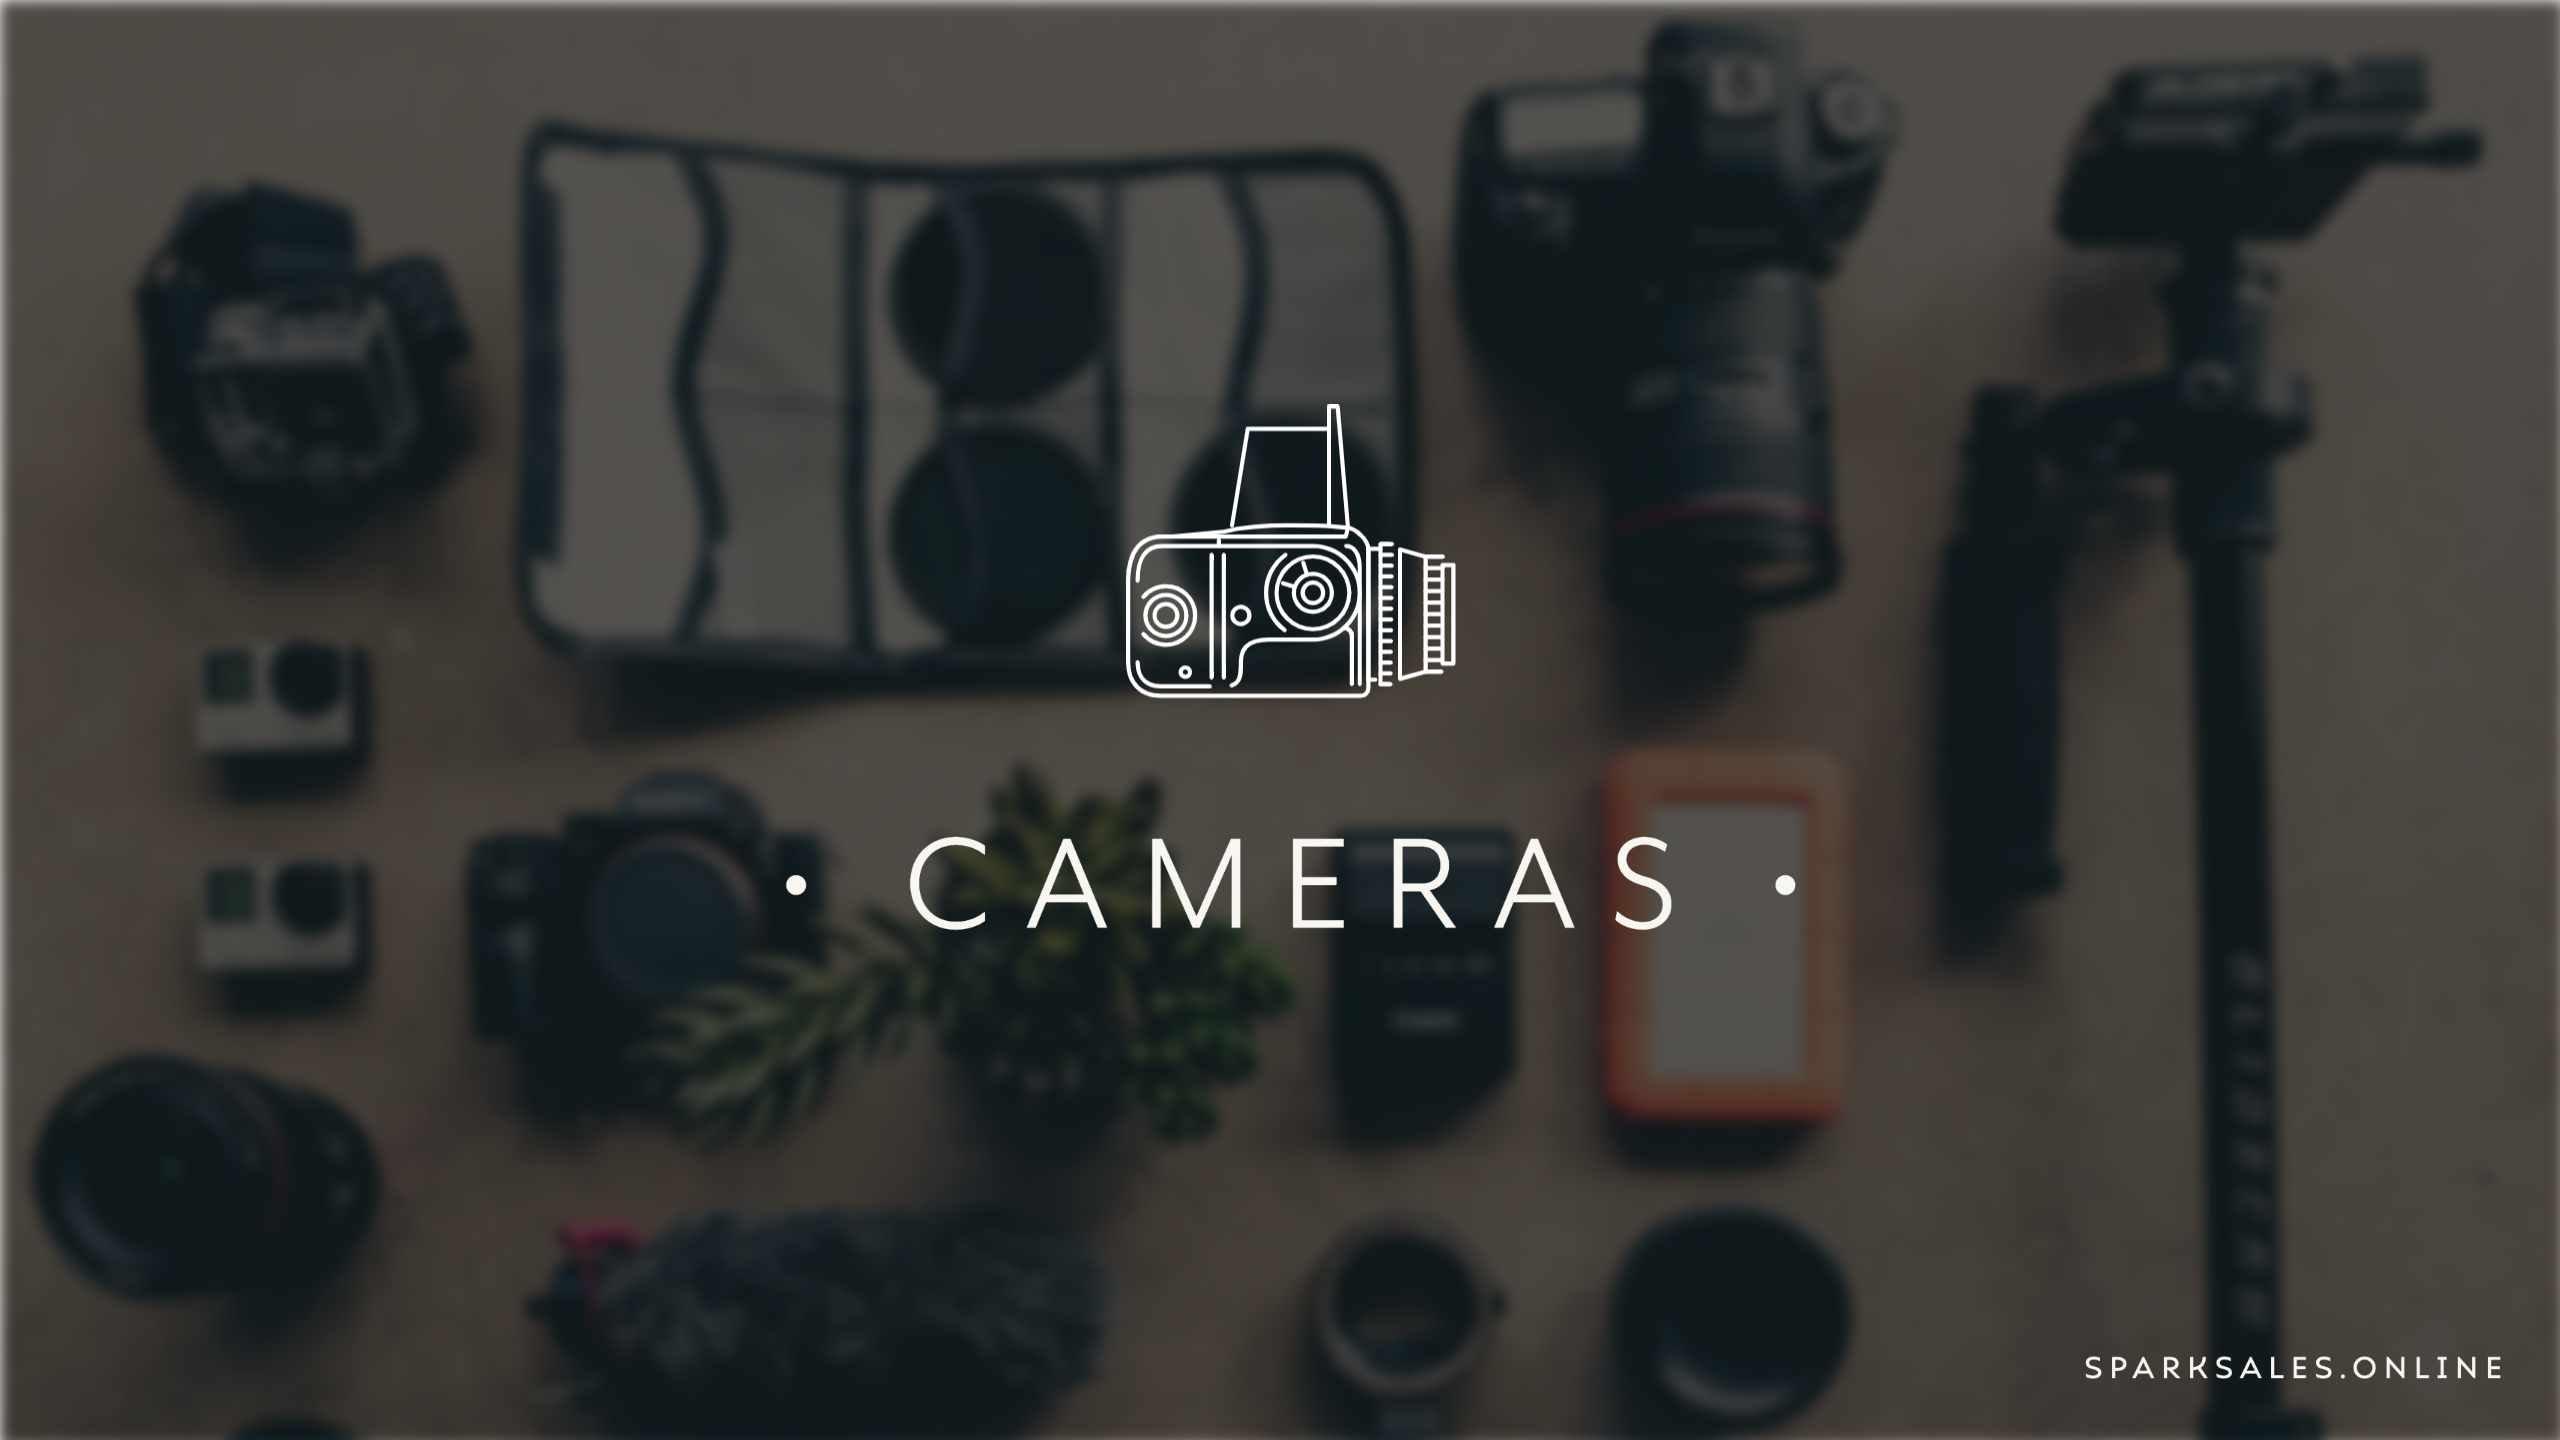 What is the best product photography camera to get started with?